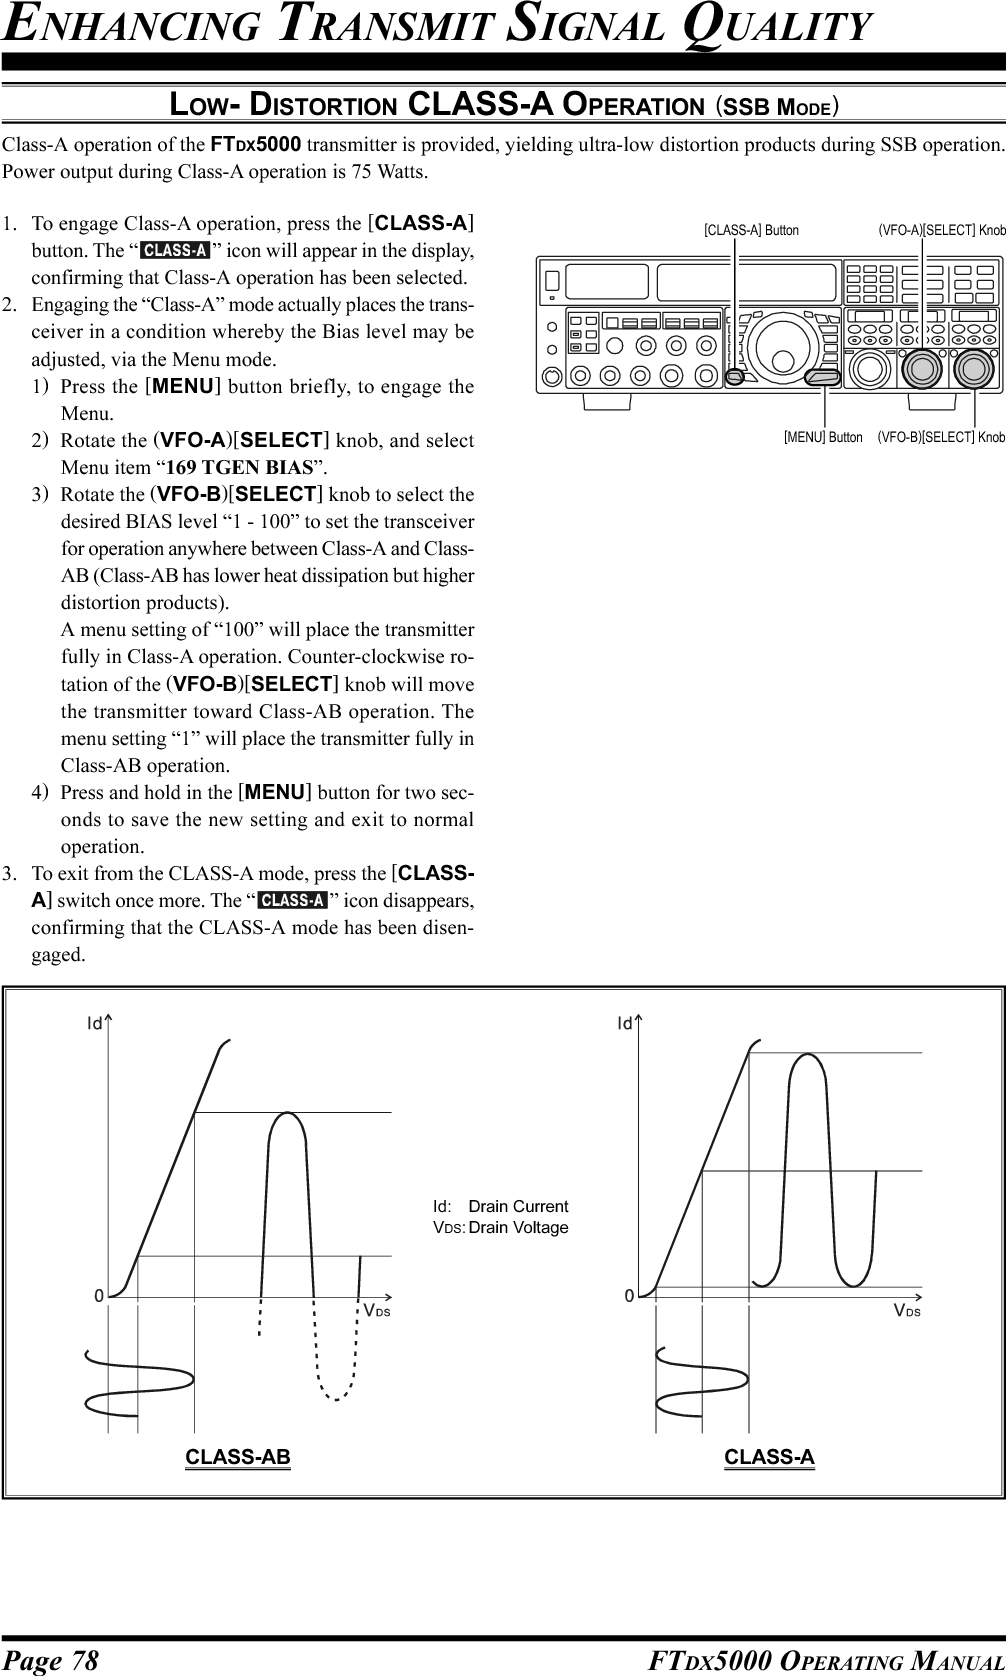 Page 78 FTDX5000 OPERATING MANUALENHANCING TRANSMIT SIGNAL QUALITYLOW- DISTORTION CLASS-A OPERATION (SSB MODE)Class-A operation of the FTDX5000 transmitter is provided, yielding ultra-low distortion products during SSB operation.Power output during Class-A operation is 75 Watts.1. To engage Class-A operation, press the [CLASS-A]button. The “ ” icon will appear in the display,confirming that Class-A operation has been selected.2. Engaging the “Class-A” mode actually places the trans-ceiver in a condition whereby the Bias level may beadjusted, via the Menu mode.1)Press the [MENU] button briefly, to engage theMenu.2)Rotate the (VFO-A)[SELECT] knob, and selectMenu item “169 TGEN BIAS”.3)Rotate the (VFO-B)[SELECT] knob to select thedesired BIAS level “1 - 100” to set the transceiverfor operation anywhere between Class-A and Class-AB (Class-AB has lower heat dissipation but higherdistortion products).A menu setting of “100” will place the transmitterfully in Class-A operation. Counter-clockwise ro-tation of the (VFO-B)[SELECT] knob will movethe transmitter toward Class-AB operation. Themenu setting “1” will place the transmitter fully inClass-AB operation.4)Press and hold in the [MENU] button for two sec-onds to save the new setting and exit to normaloperation.3. To exit from the CLASS-A mode, press the [CLASS-A] switch once more. The “ ” icon disappears,confirming that the CLASS-A mode has been disen-gaged.CLASS-AB CLASS-AId: Drain CurrentVDS: Drain Voltage(VFO-B)[SELECT] Knob[MENU] Button(VFO-A)[SELECT] Knob[CLASS-A] Button